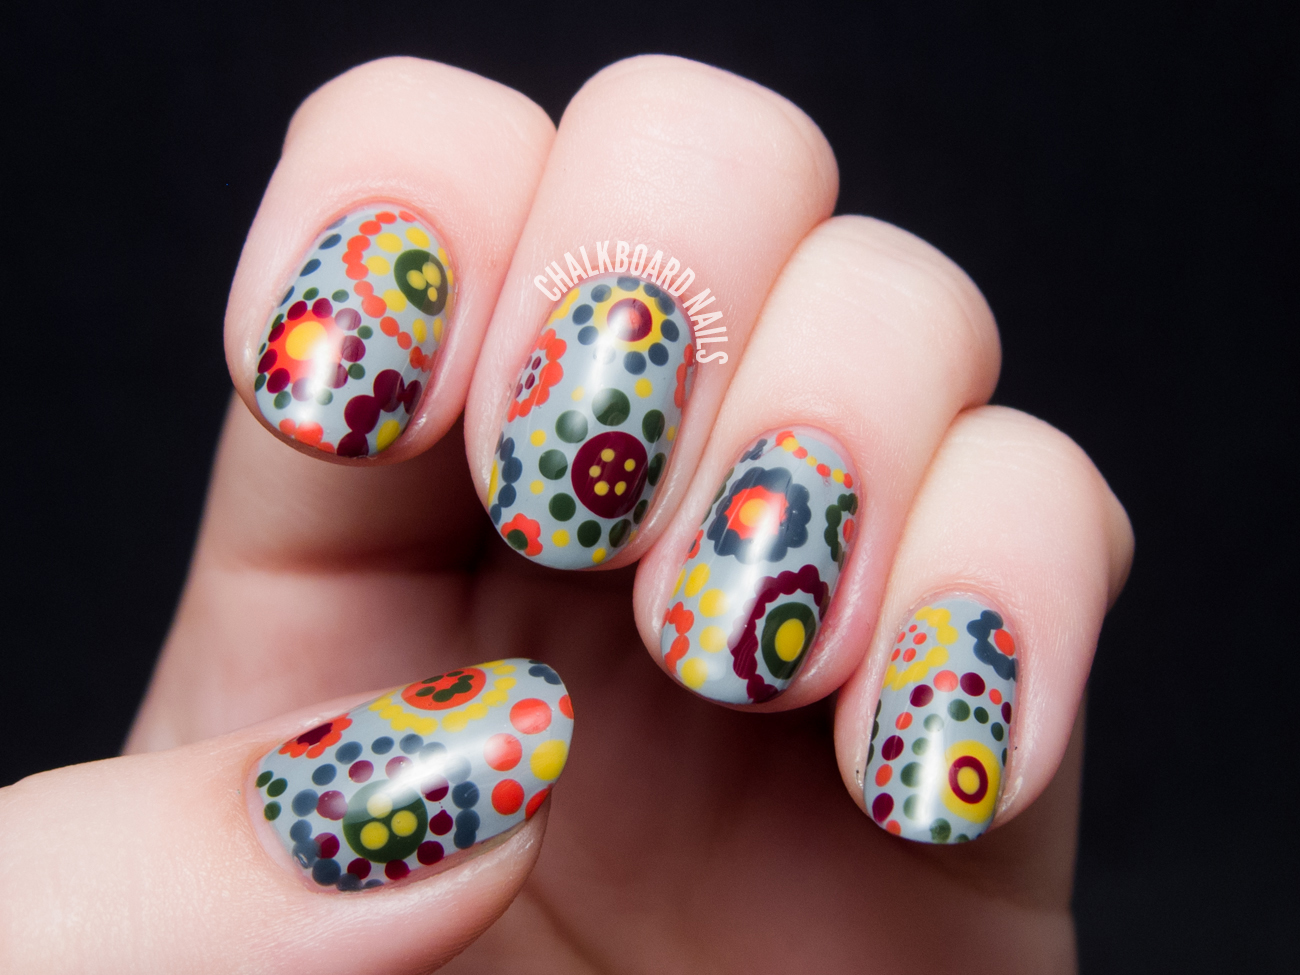 5. Flower Power Nails - wide 3